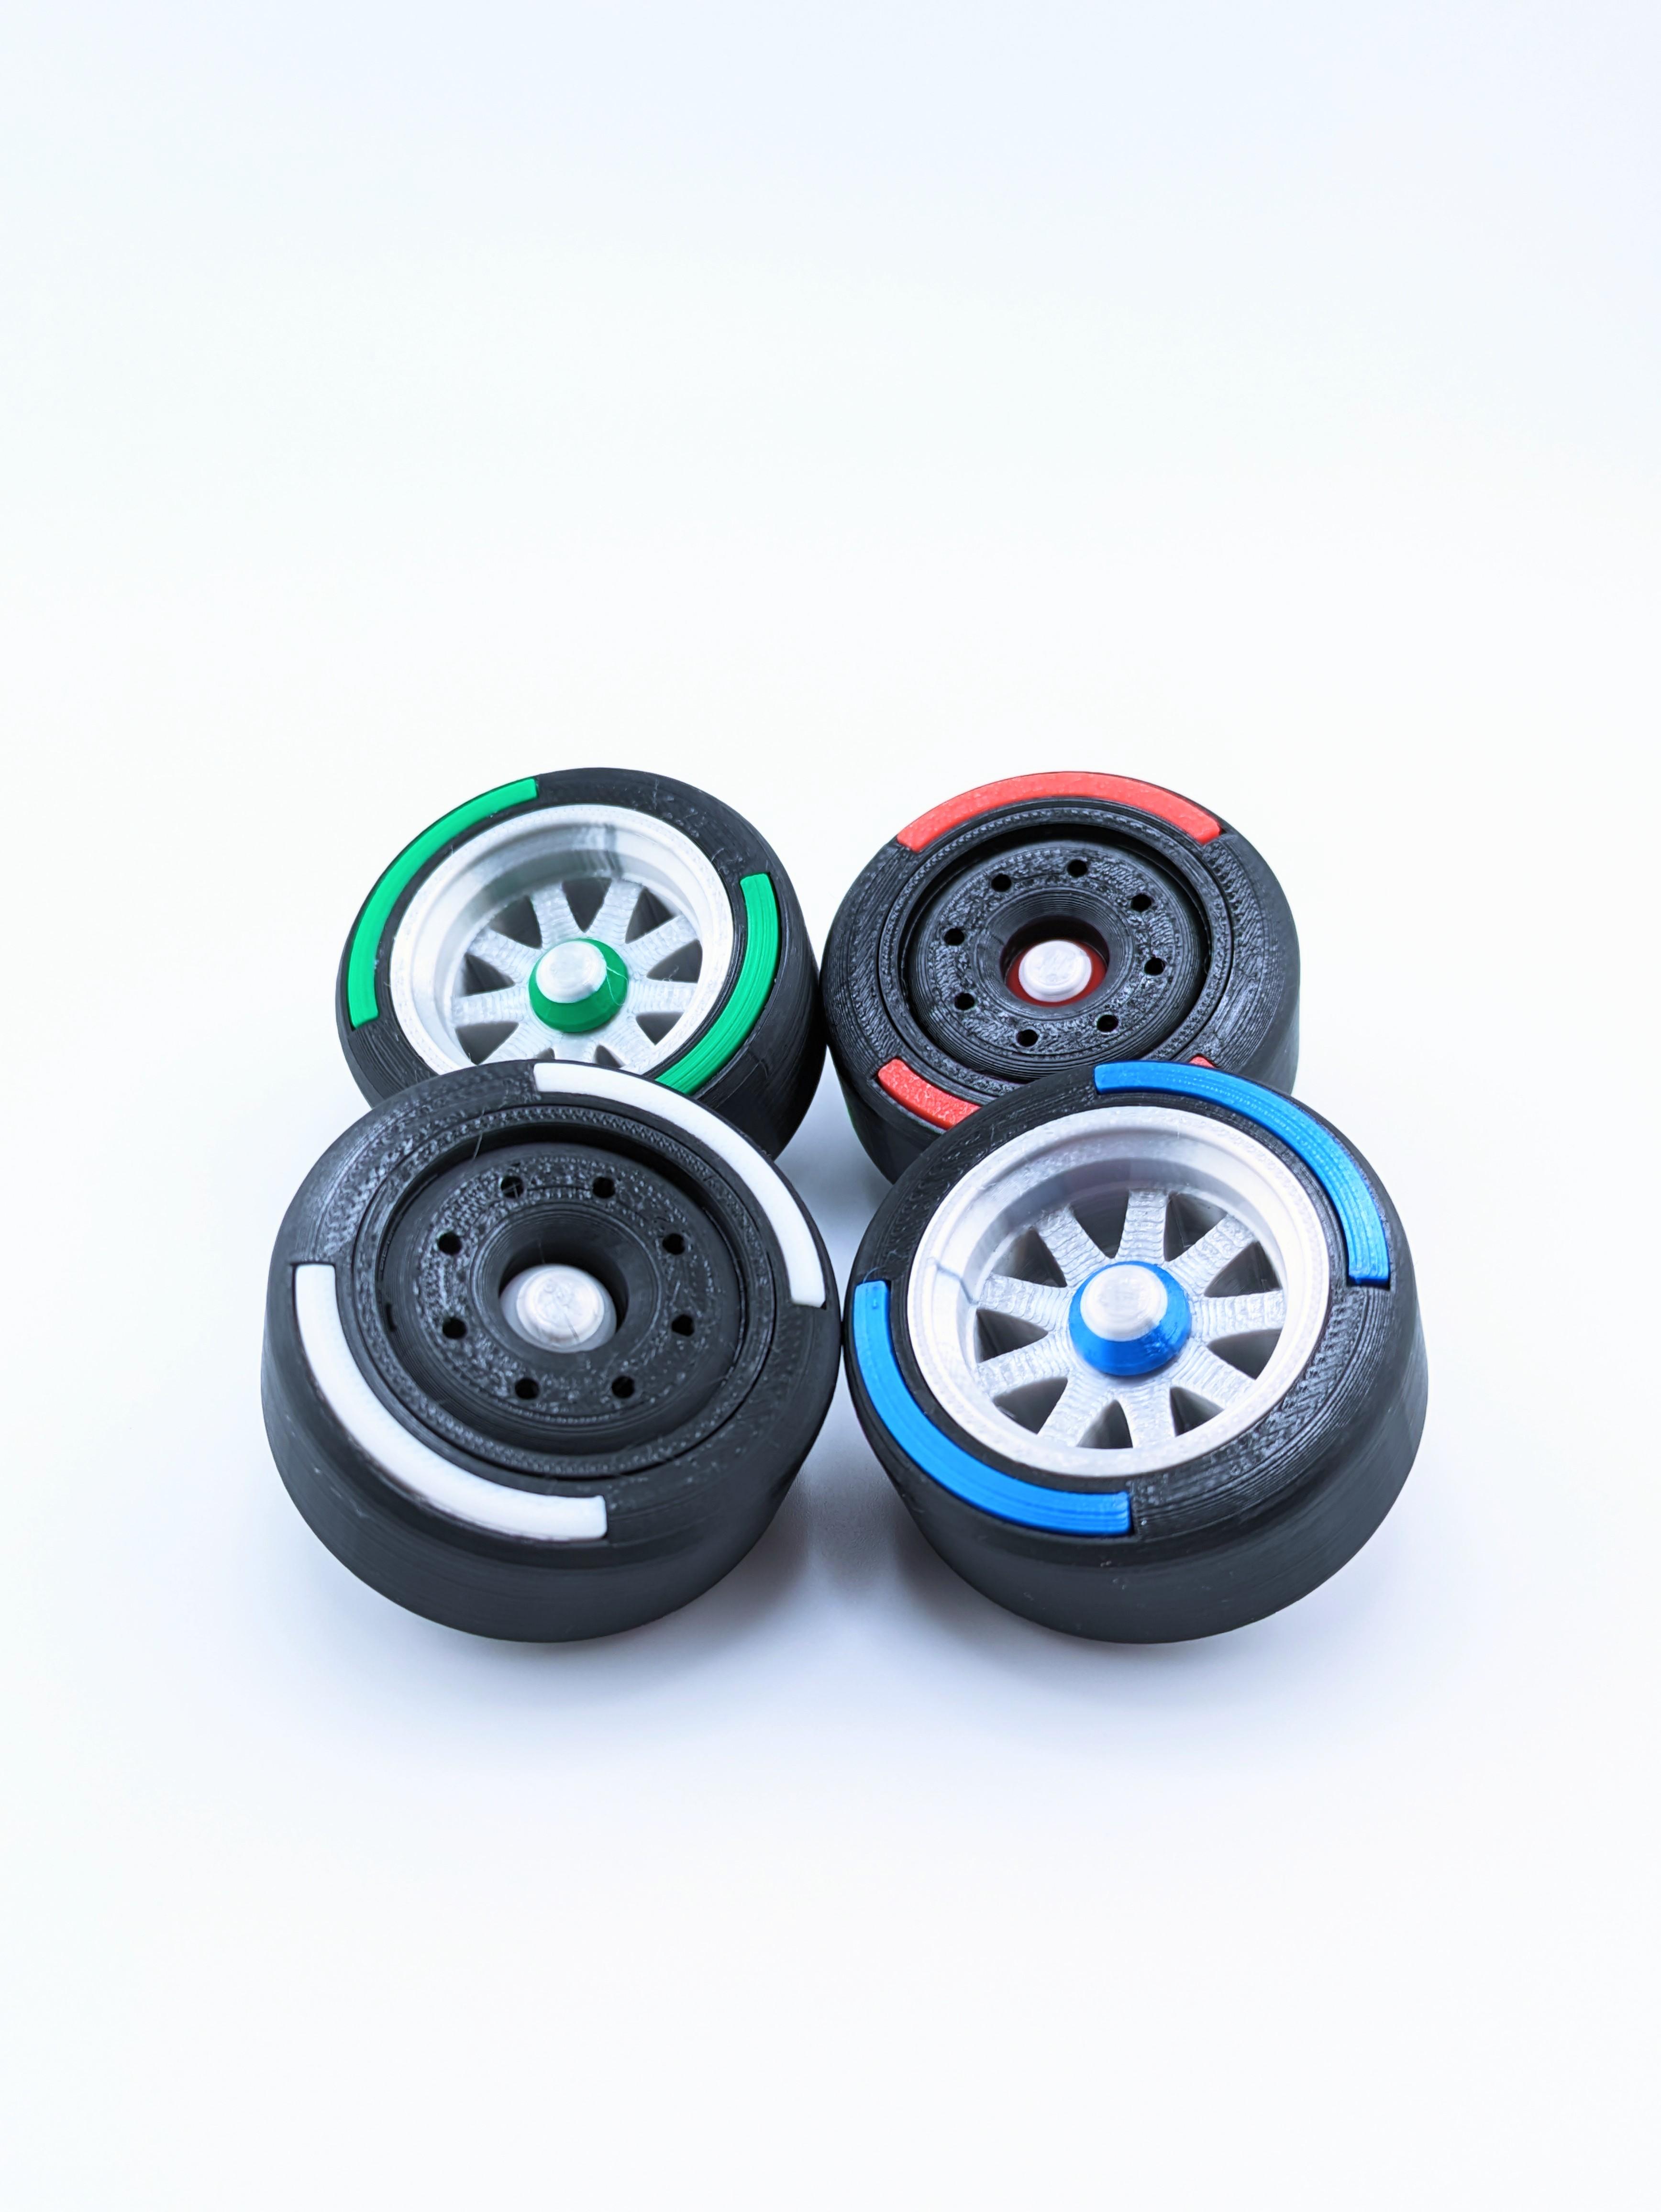 Spinning F1 Inspired Tire Keychain 3d model